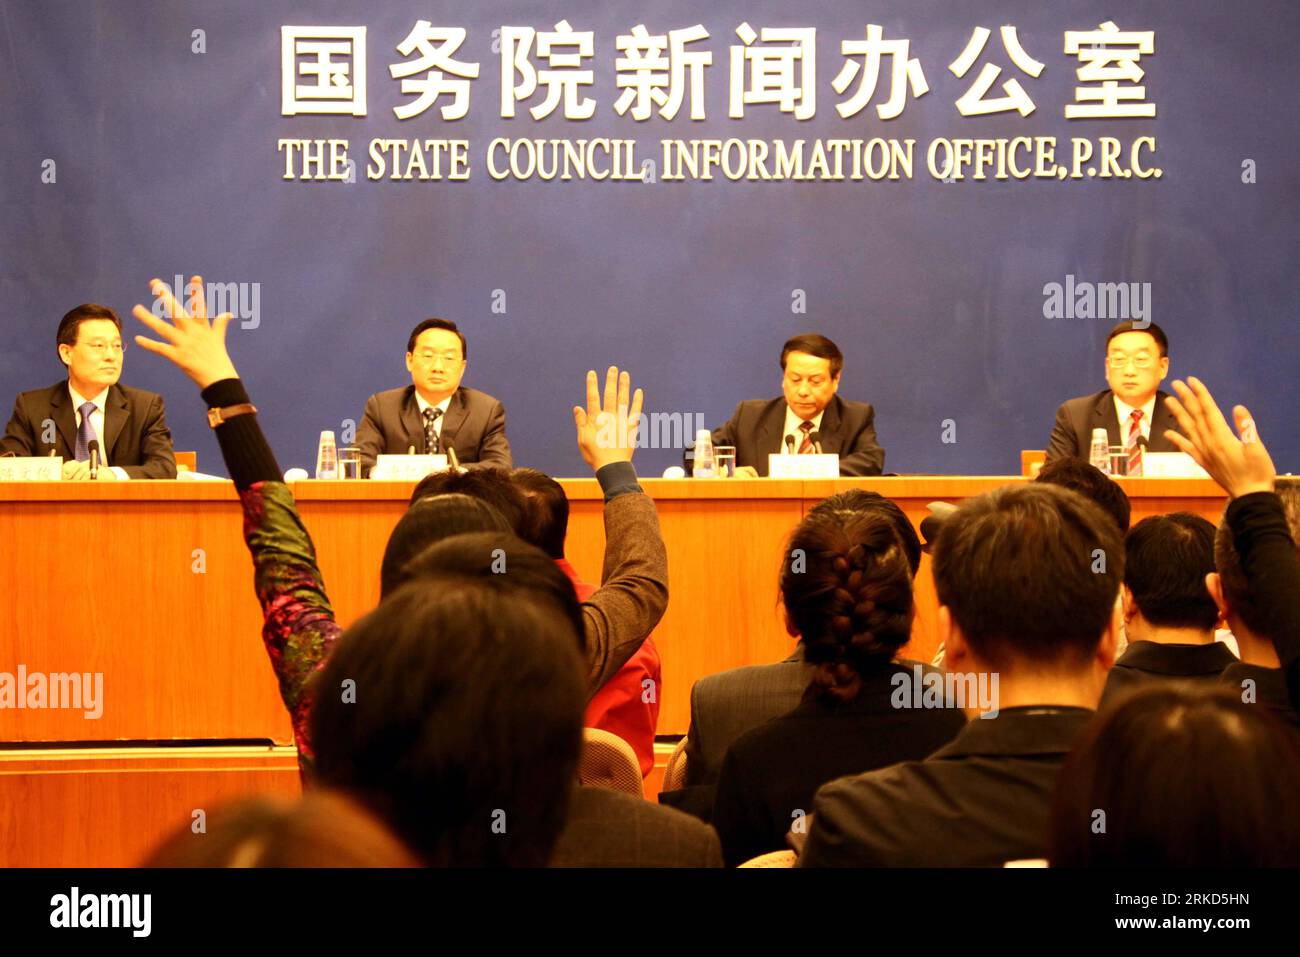 Bildnummer: 54864831  Datum: 30.01.2011  Copyright: imago/Xinhua (110130) -- BEIJING, Jan. 30, 2011 (Xinhua) -- Journalists raise questions at the press conference held by State Council Information Office in Beijing, capital of China, Jan. 30, 2011. China would carry out strict water resource management measures to grapple with water shortages, Minister of Water Resources Chen Lei said Sunday after the central authorities Saturday issued its first document of the year. (Xinhua/Gao Xueyu) (cxy) CHINA-BEIJING-WATER PROTECTION-PRESS CONFERENCE (CN) PUBLICATIONxNOTxINxCHN People Politik kbdig xdp Stock Photo